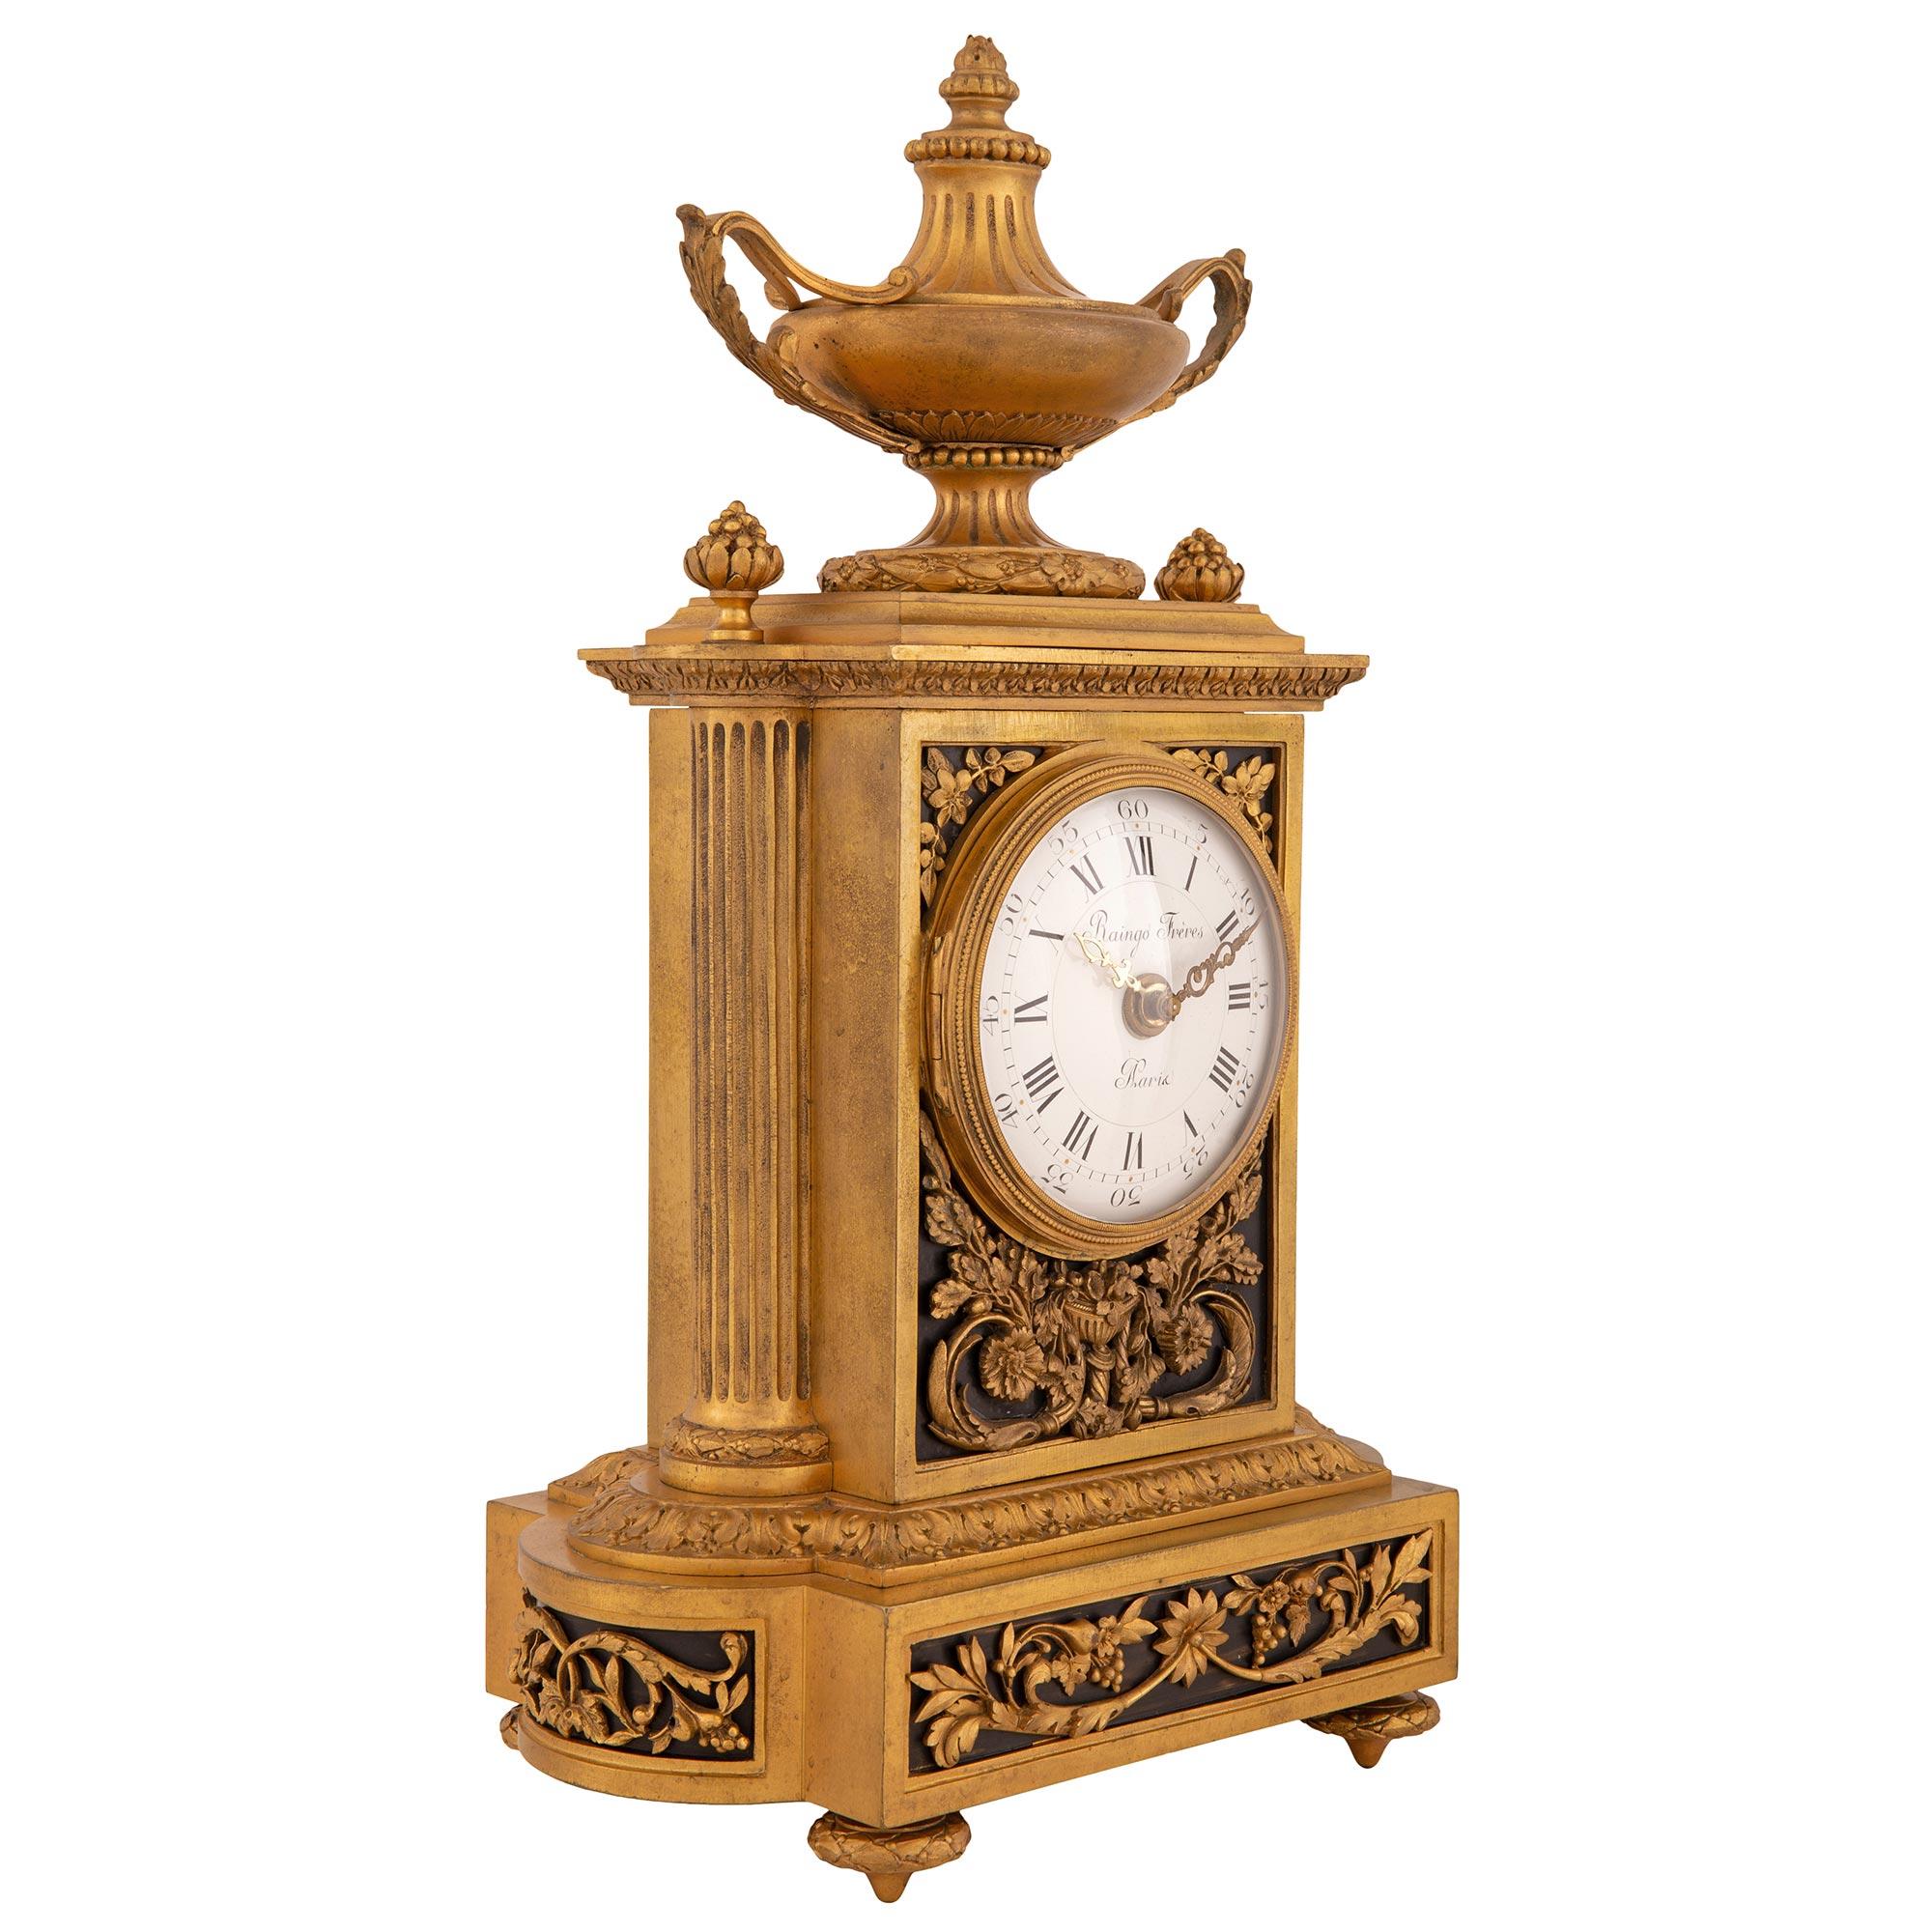 An exceptional and very high quality French 19th century Louis XVI st. ormolu and patinated bronze clock, signed Raingo Frères Paris. The clock is raised by most elegant topie shaped feet with fine berried laurel bands. The base displays exceptional